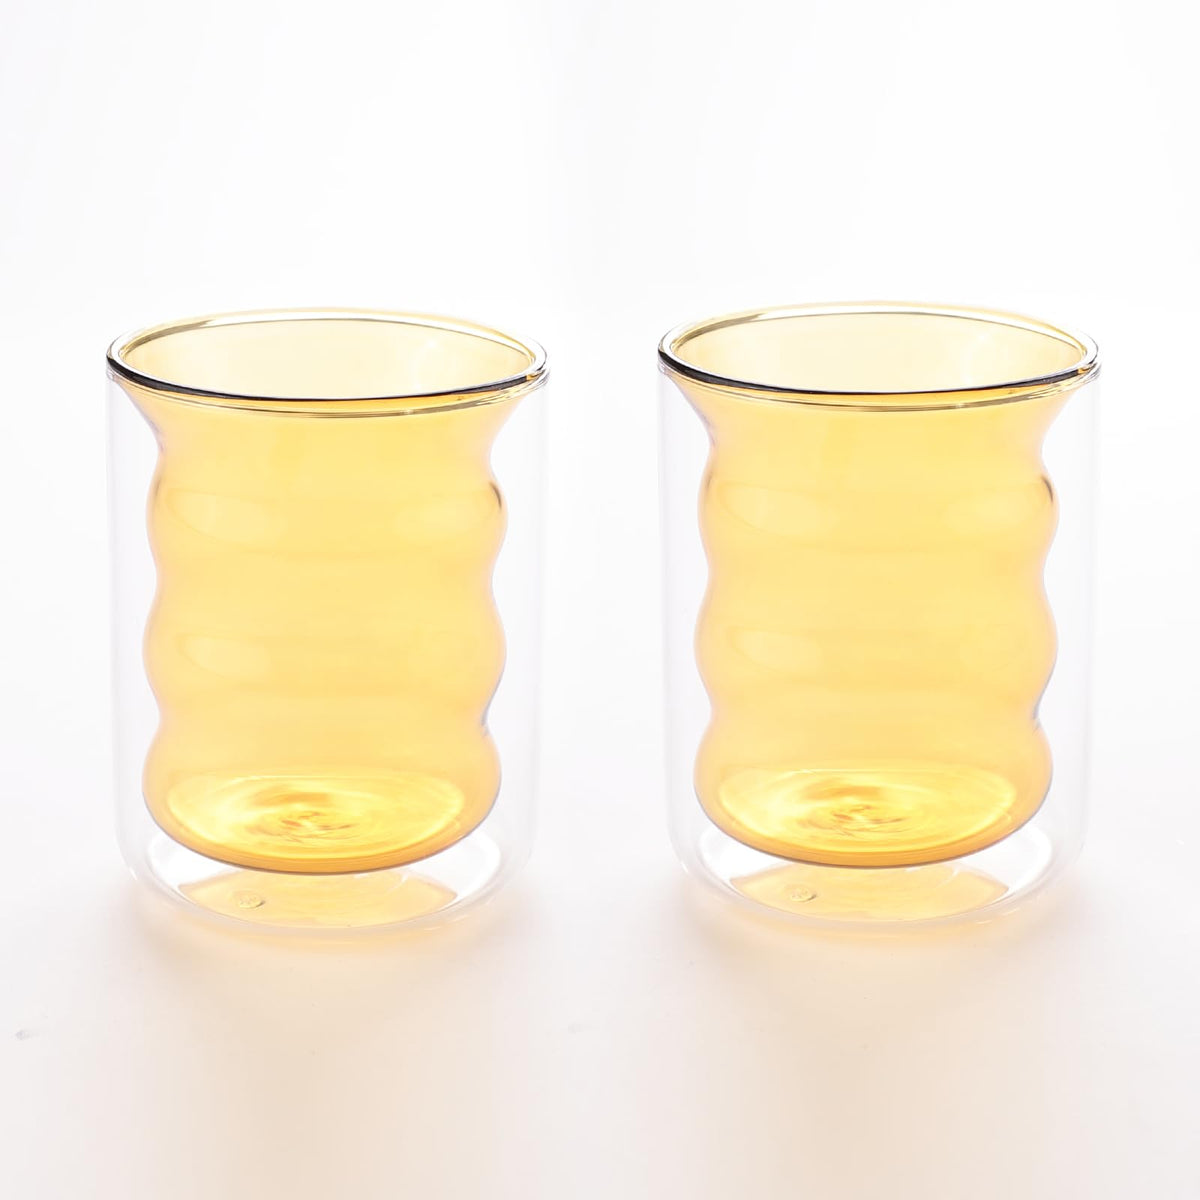 UMAI Double Wall Borosilicate Glass Coffee Mug Set of 2-200ml | Unique Curvy Design | High Thermal Resistance | Microwave/Dishwasher Safe | Gifting Pack for Friends/Couples | Yellow